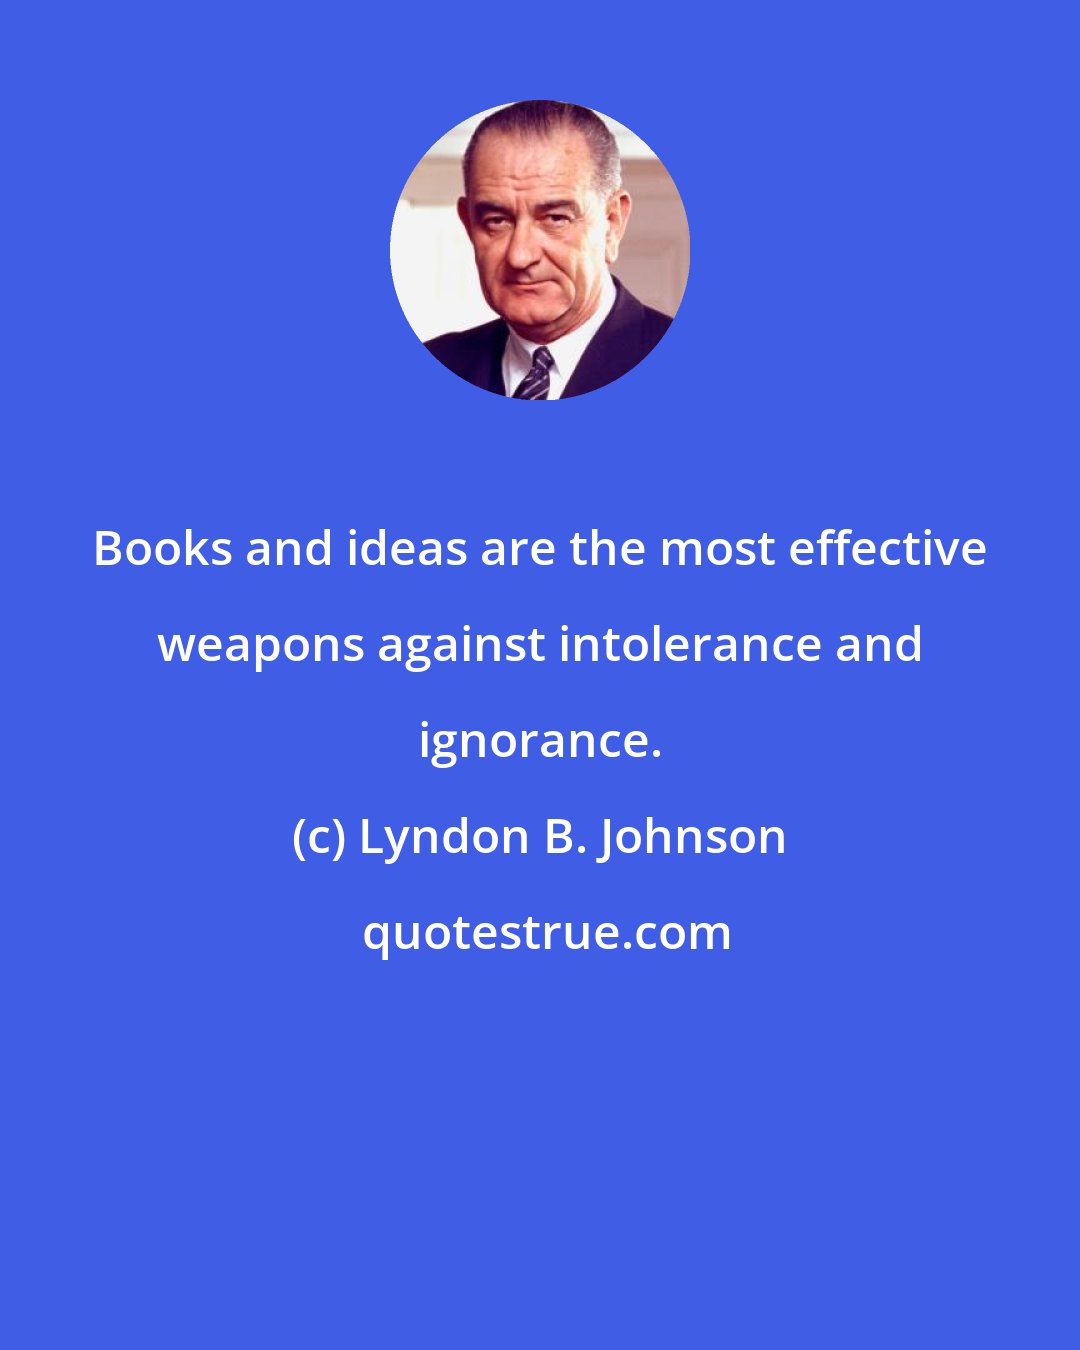 Lyndon B. Johnson: Books and ideas are the most effective weapons against intolerance and ignorance.